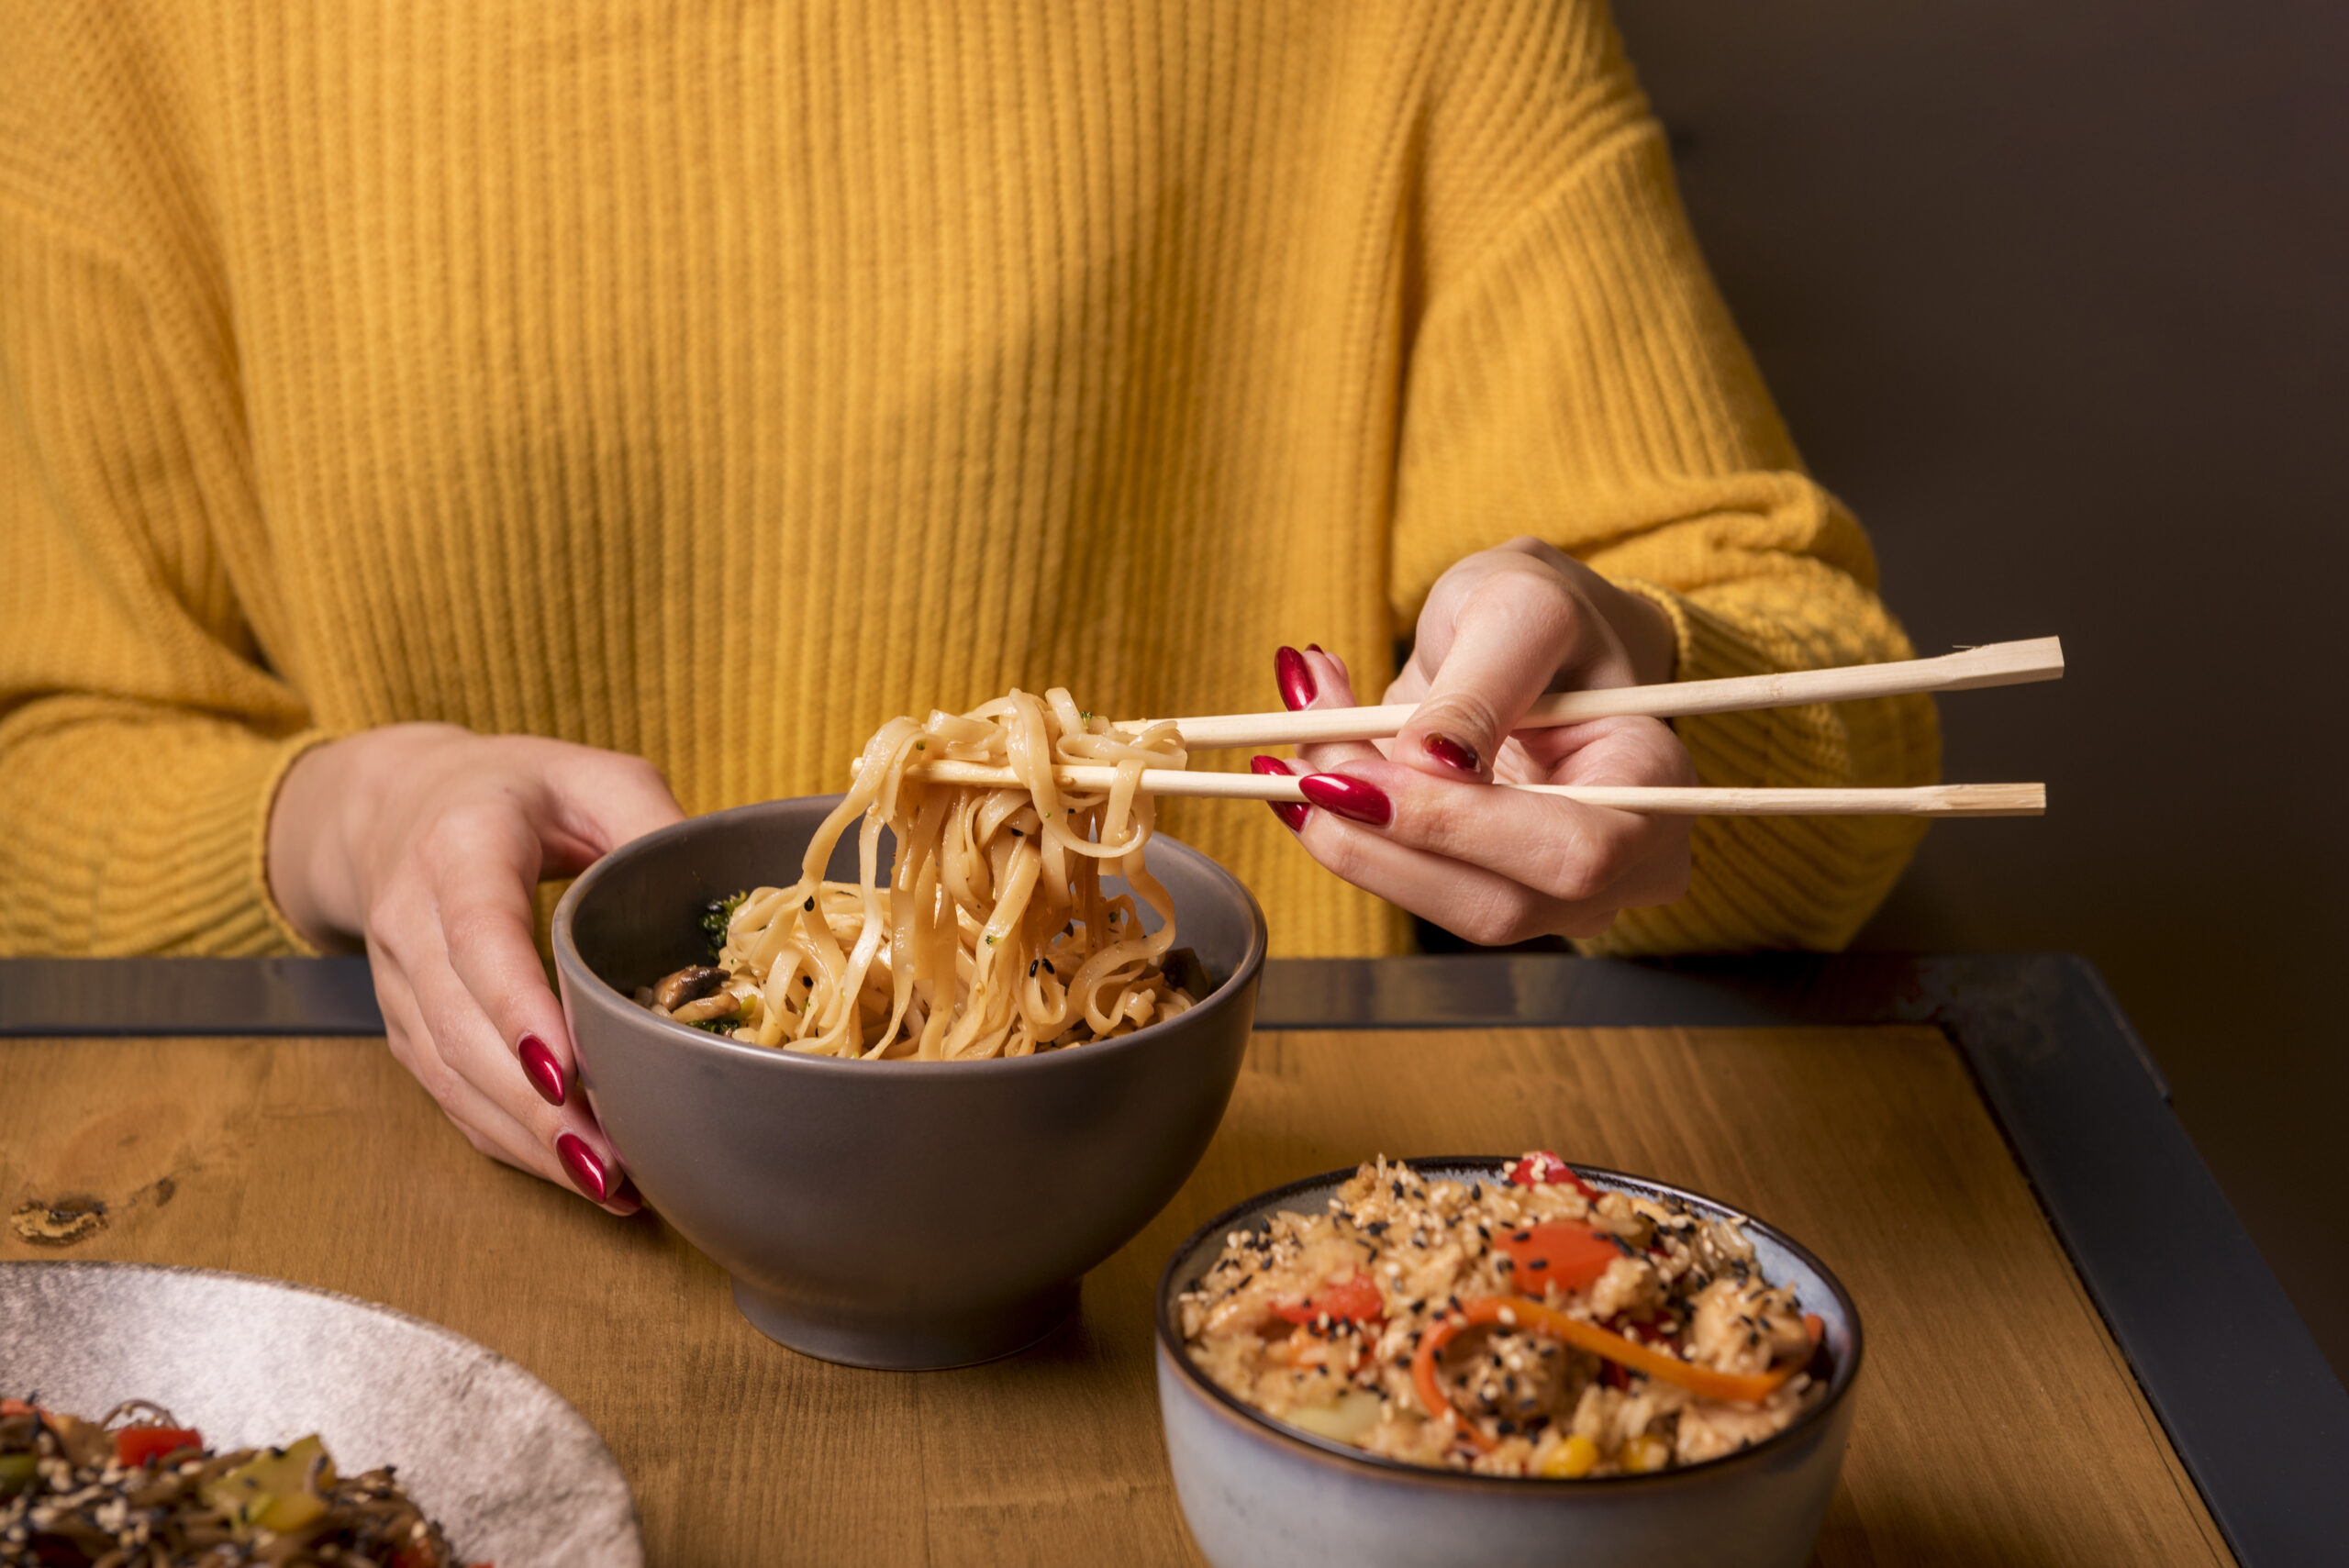 A woman eating noodles with chopsticks